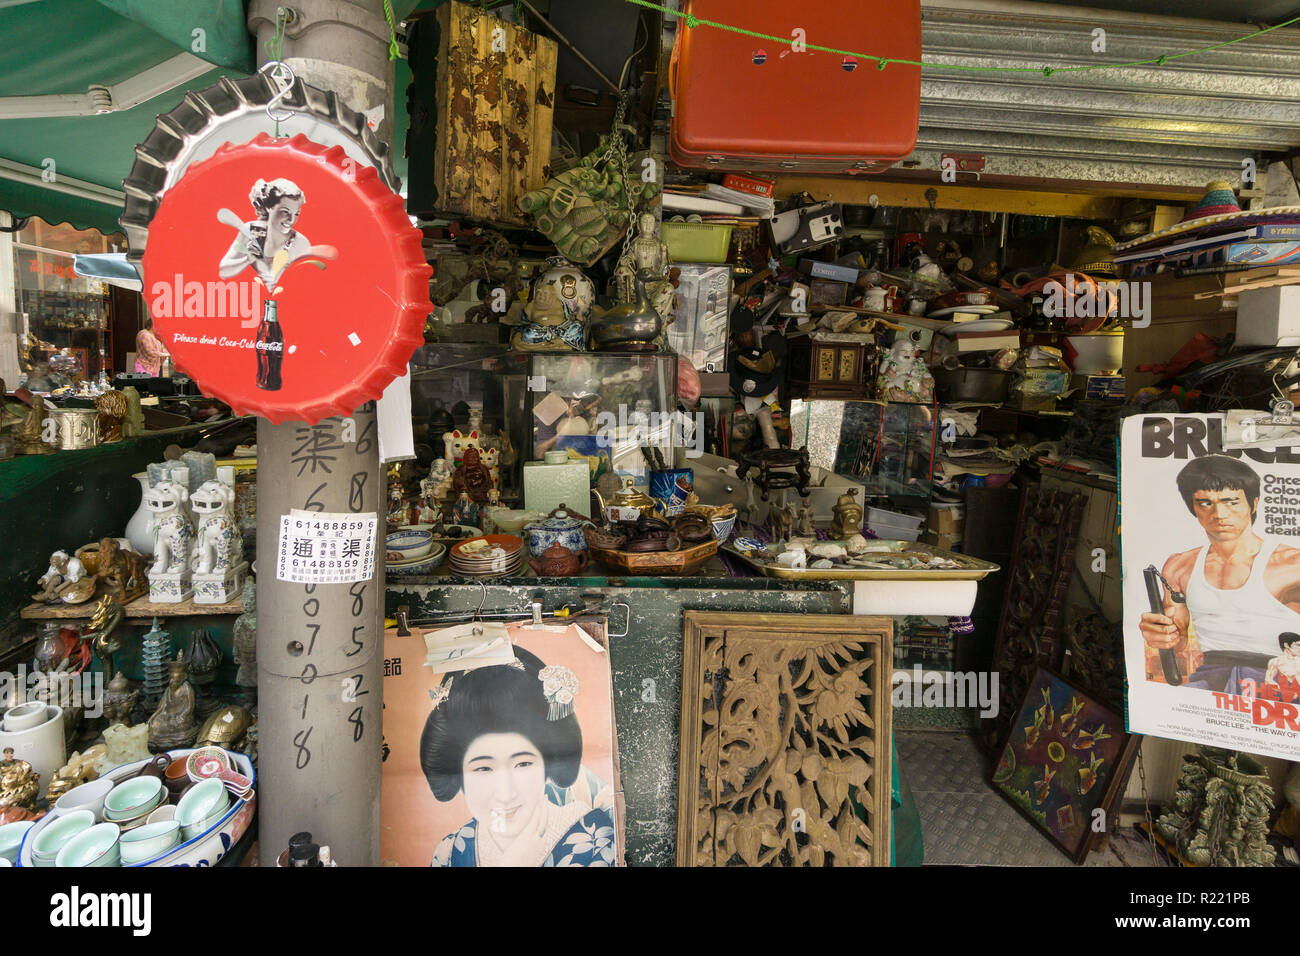 Hong Kong, China - May 24 2018: Antiques, memorabilia and other knick knacks stall in the historic Cat Street market in Soho, Hollywood road in Hong K Stock Photo